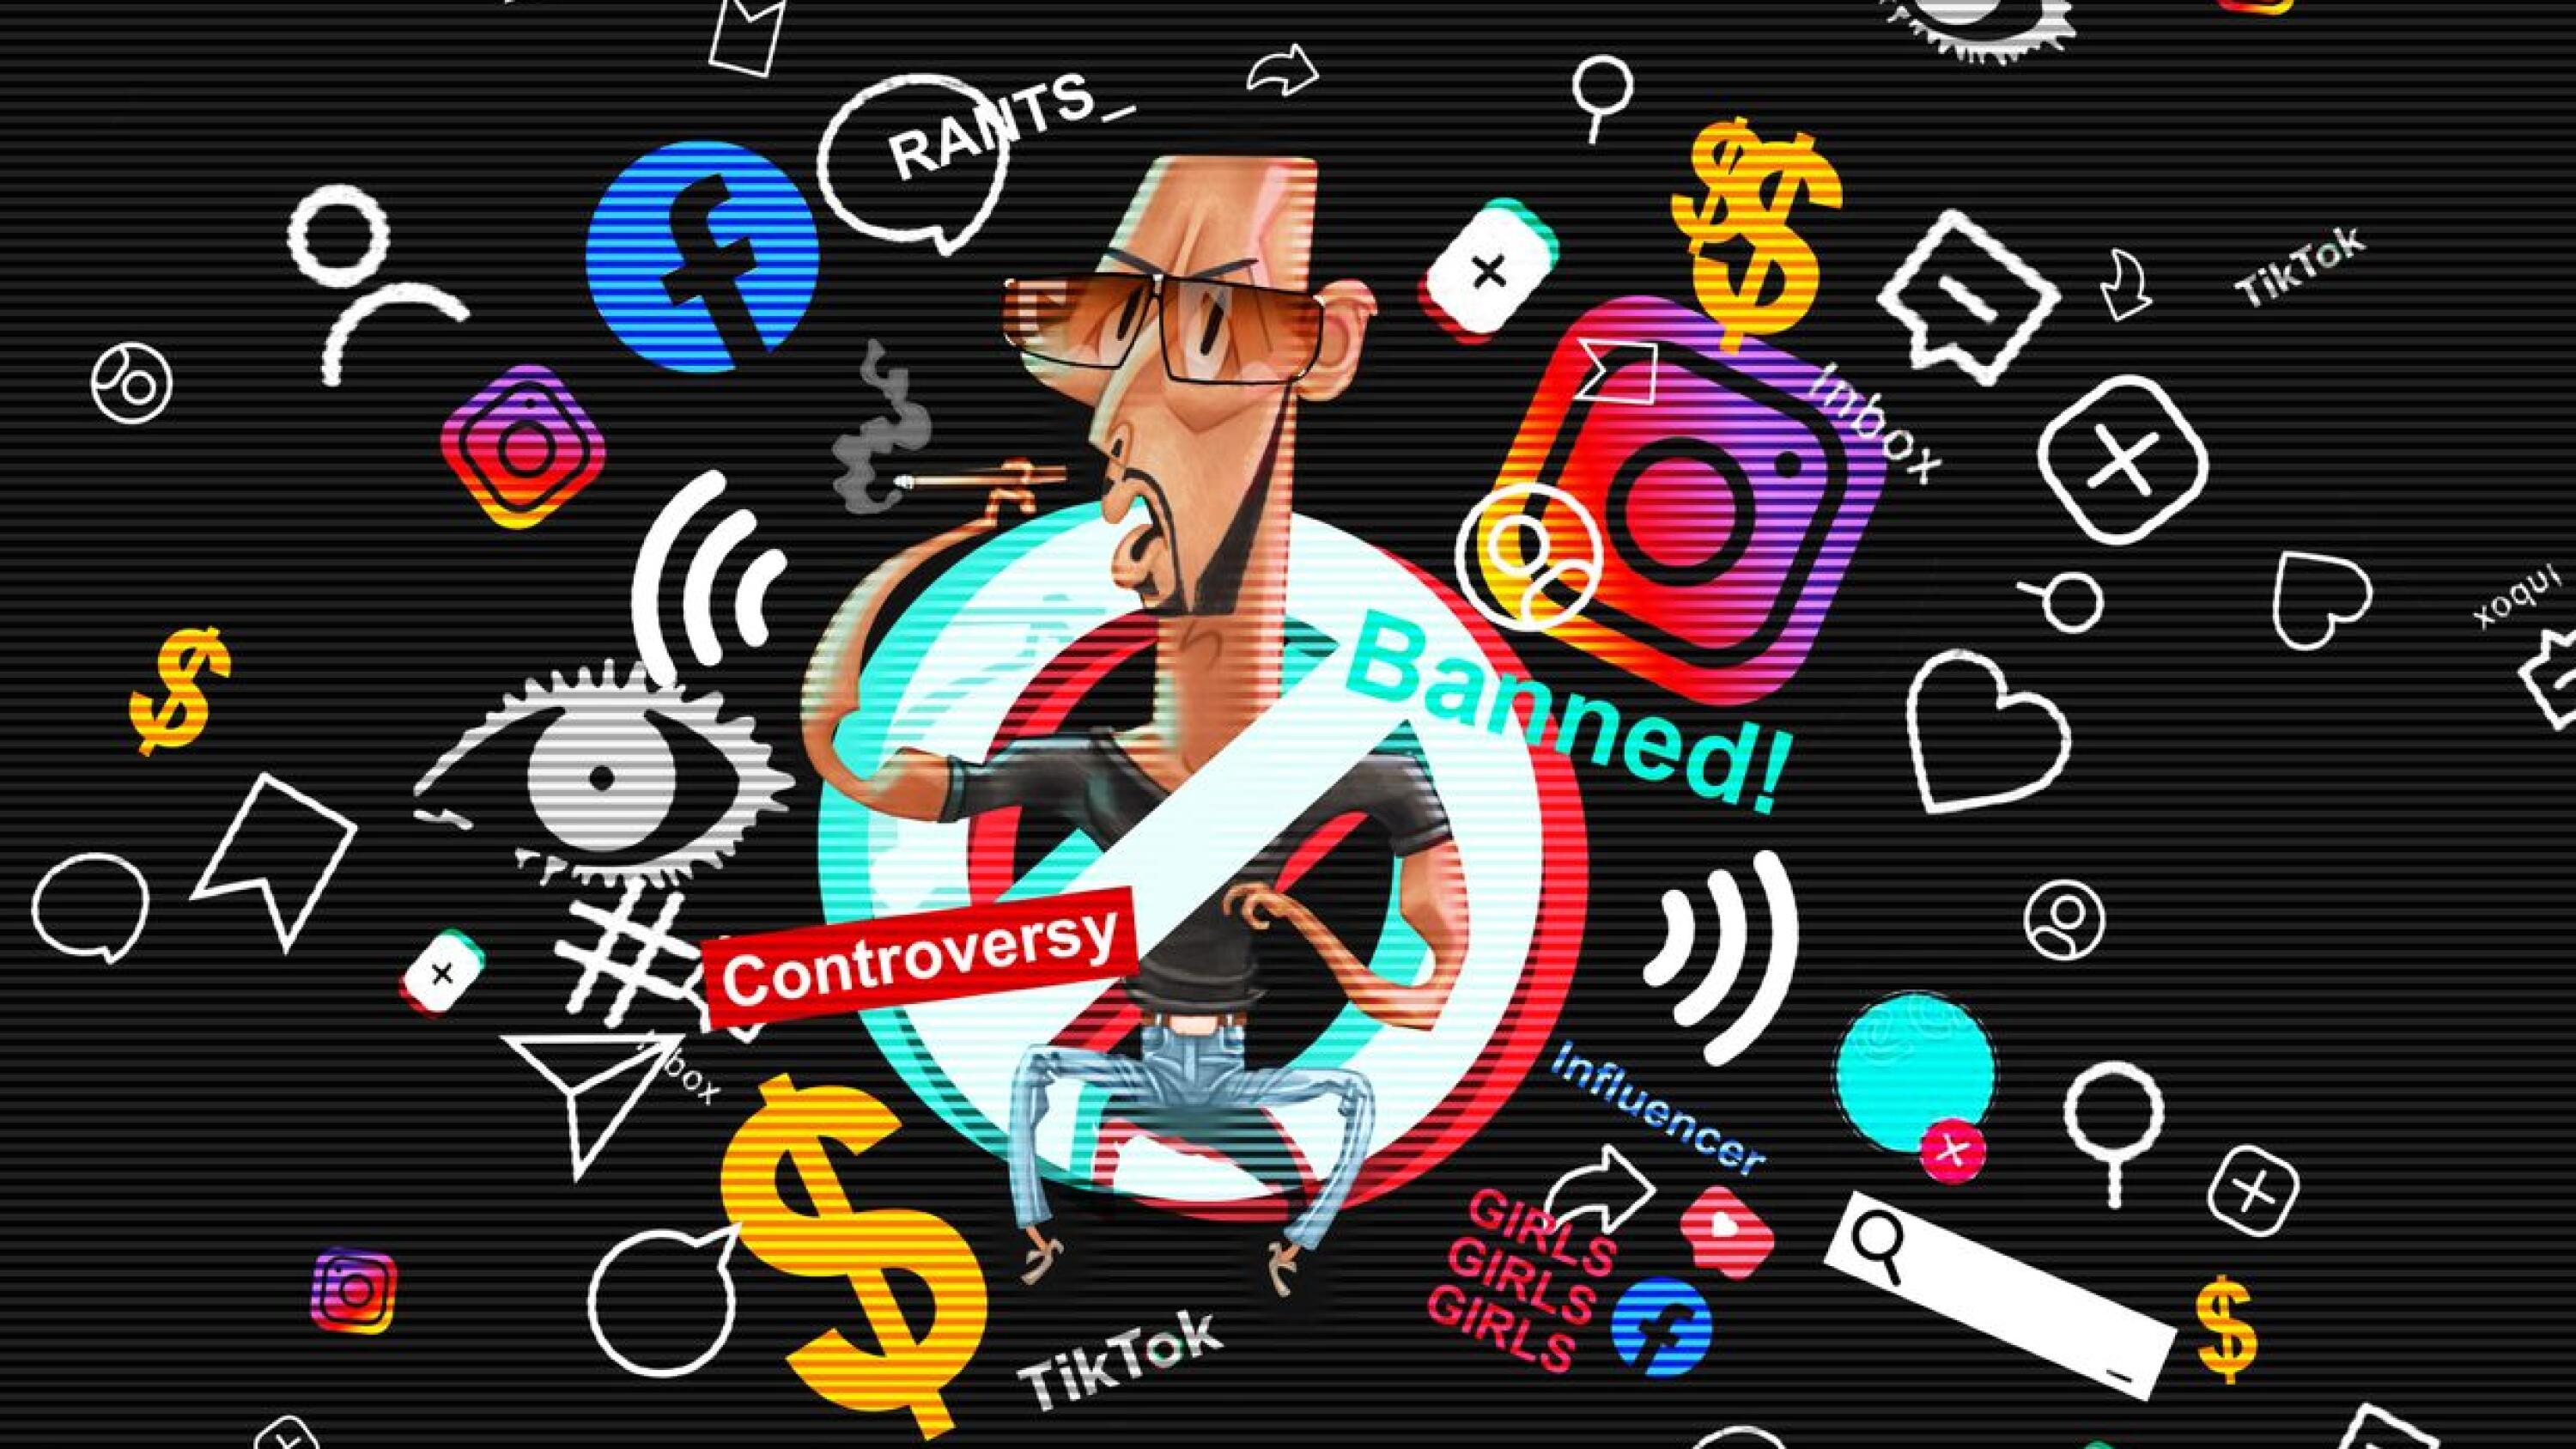 Andrew Tate: Who is the controversial TikTok influencer?